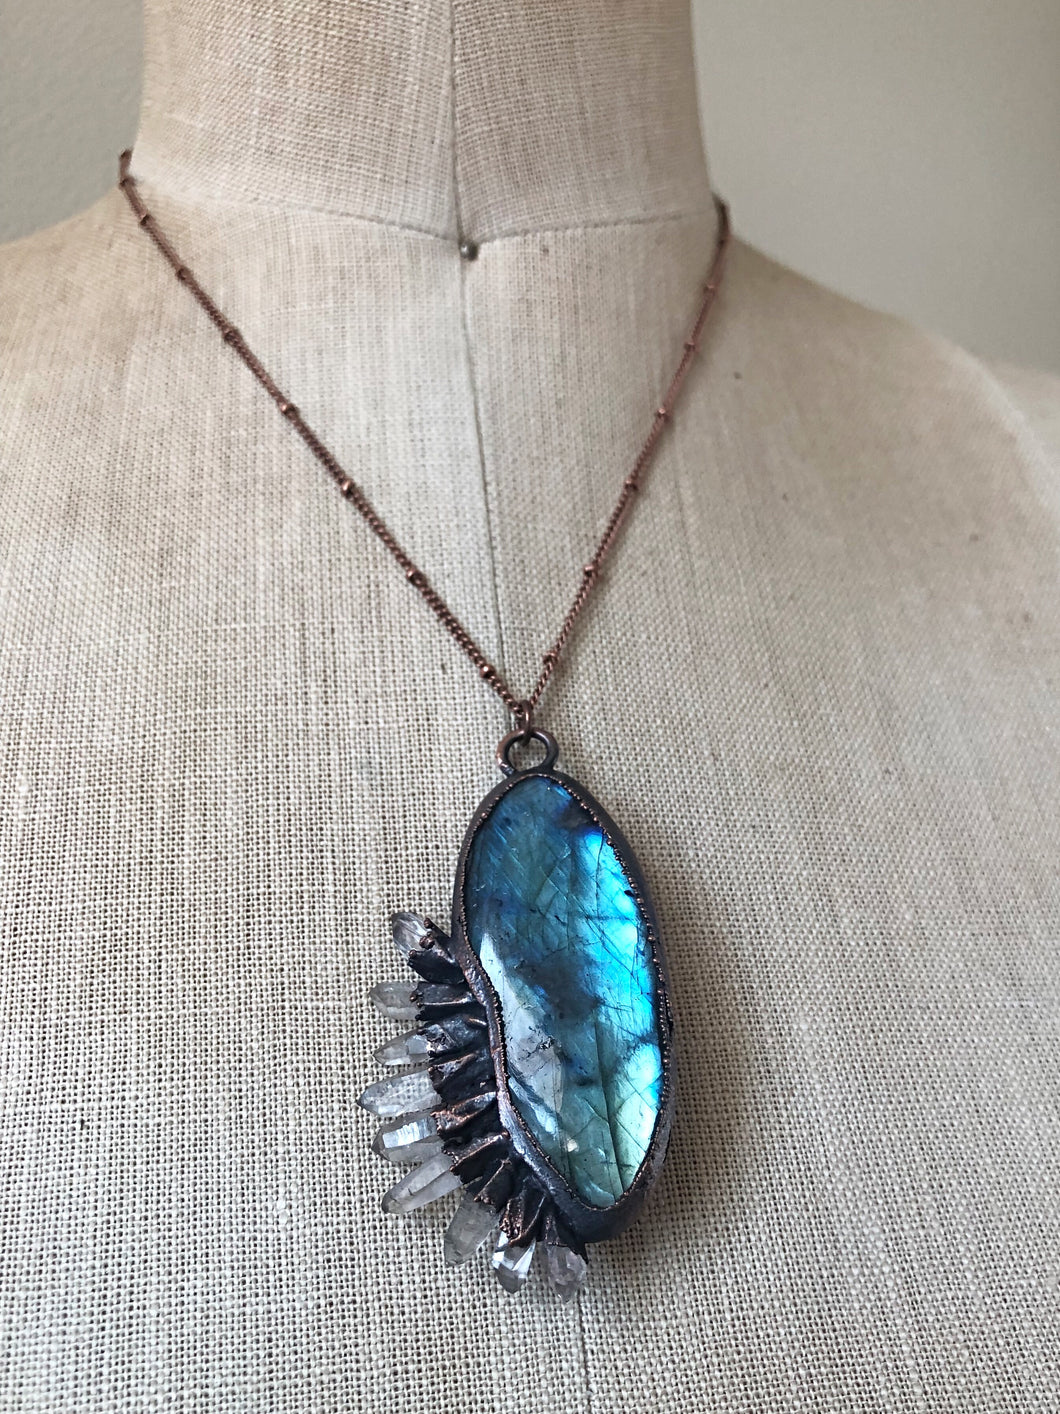 Labradorite Necklace with Clear Quartz Points #2- Ready to Ship